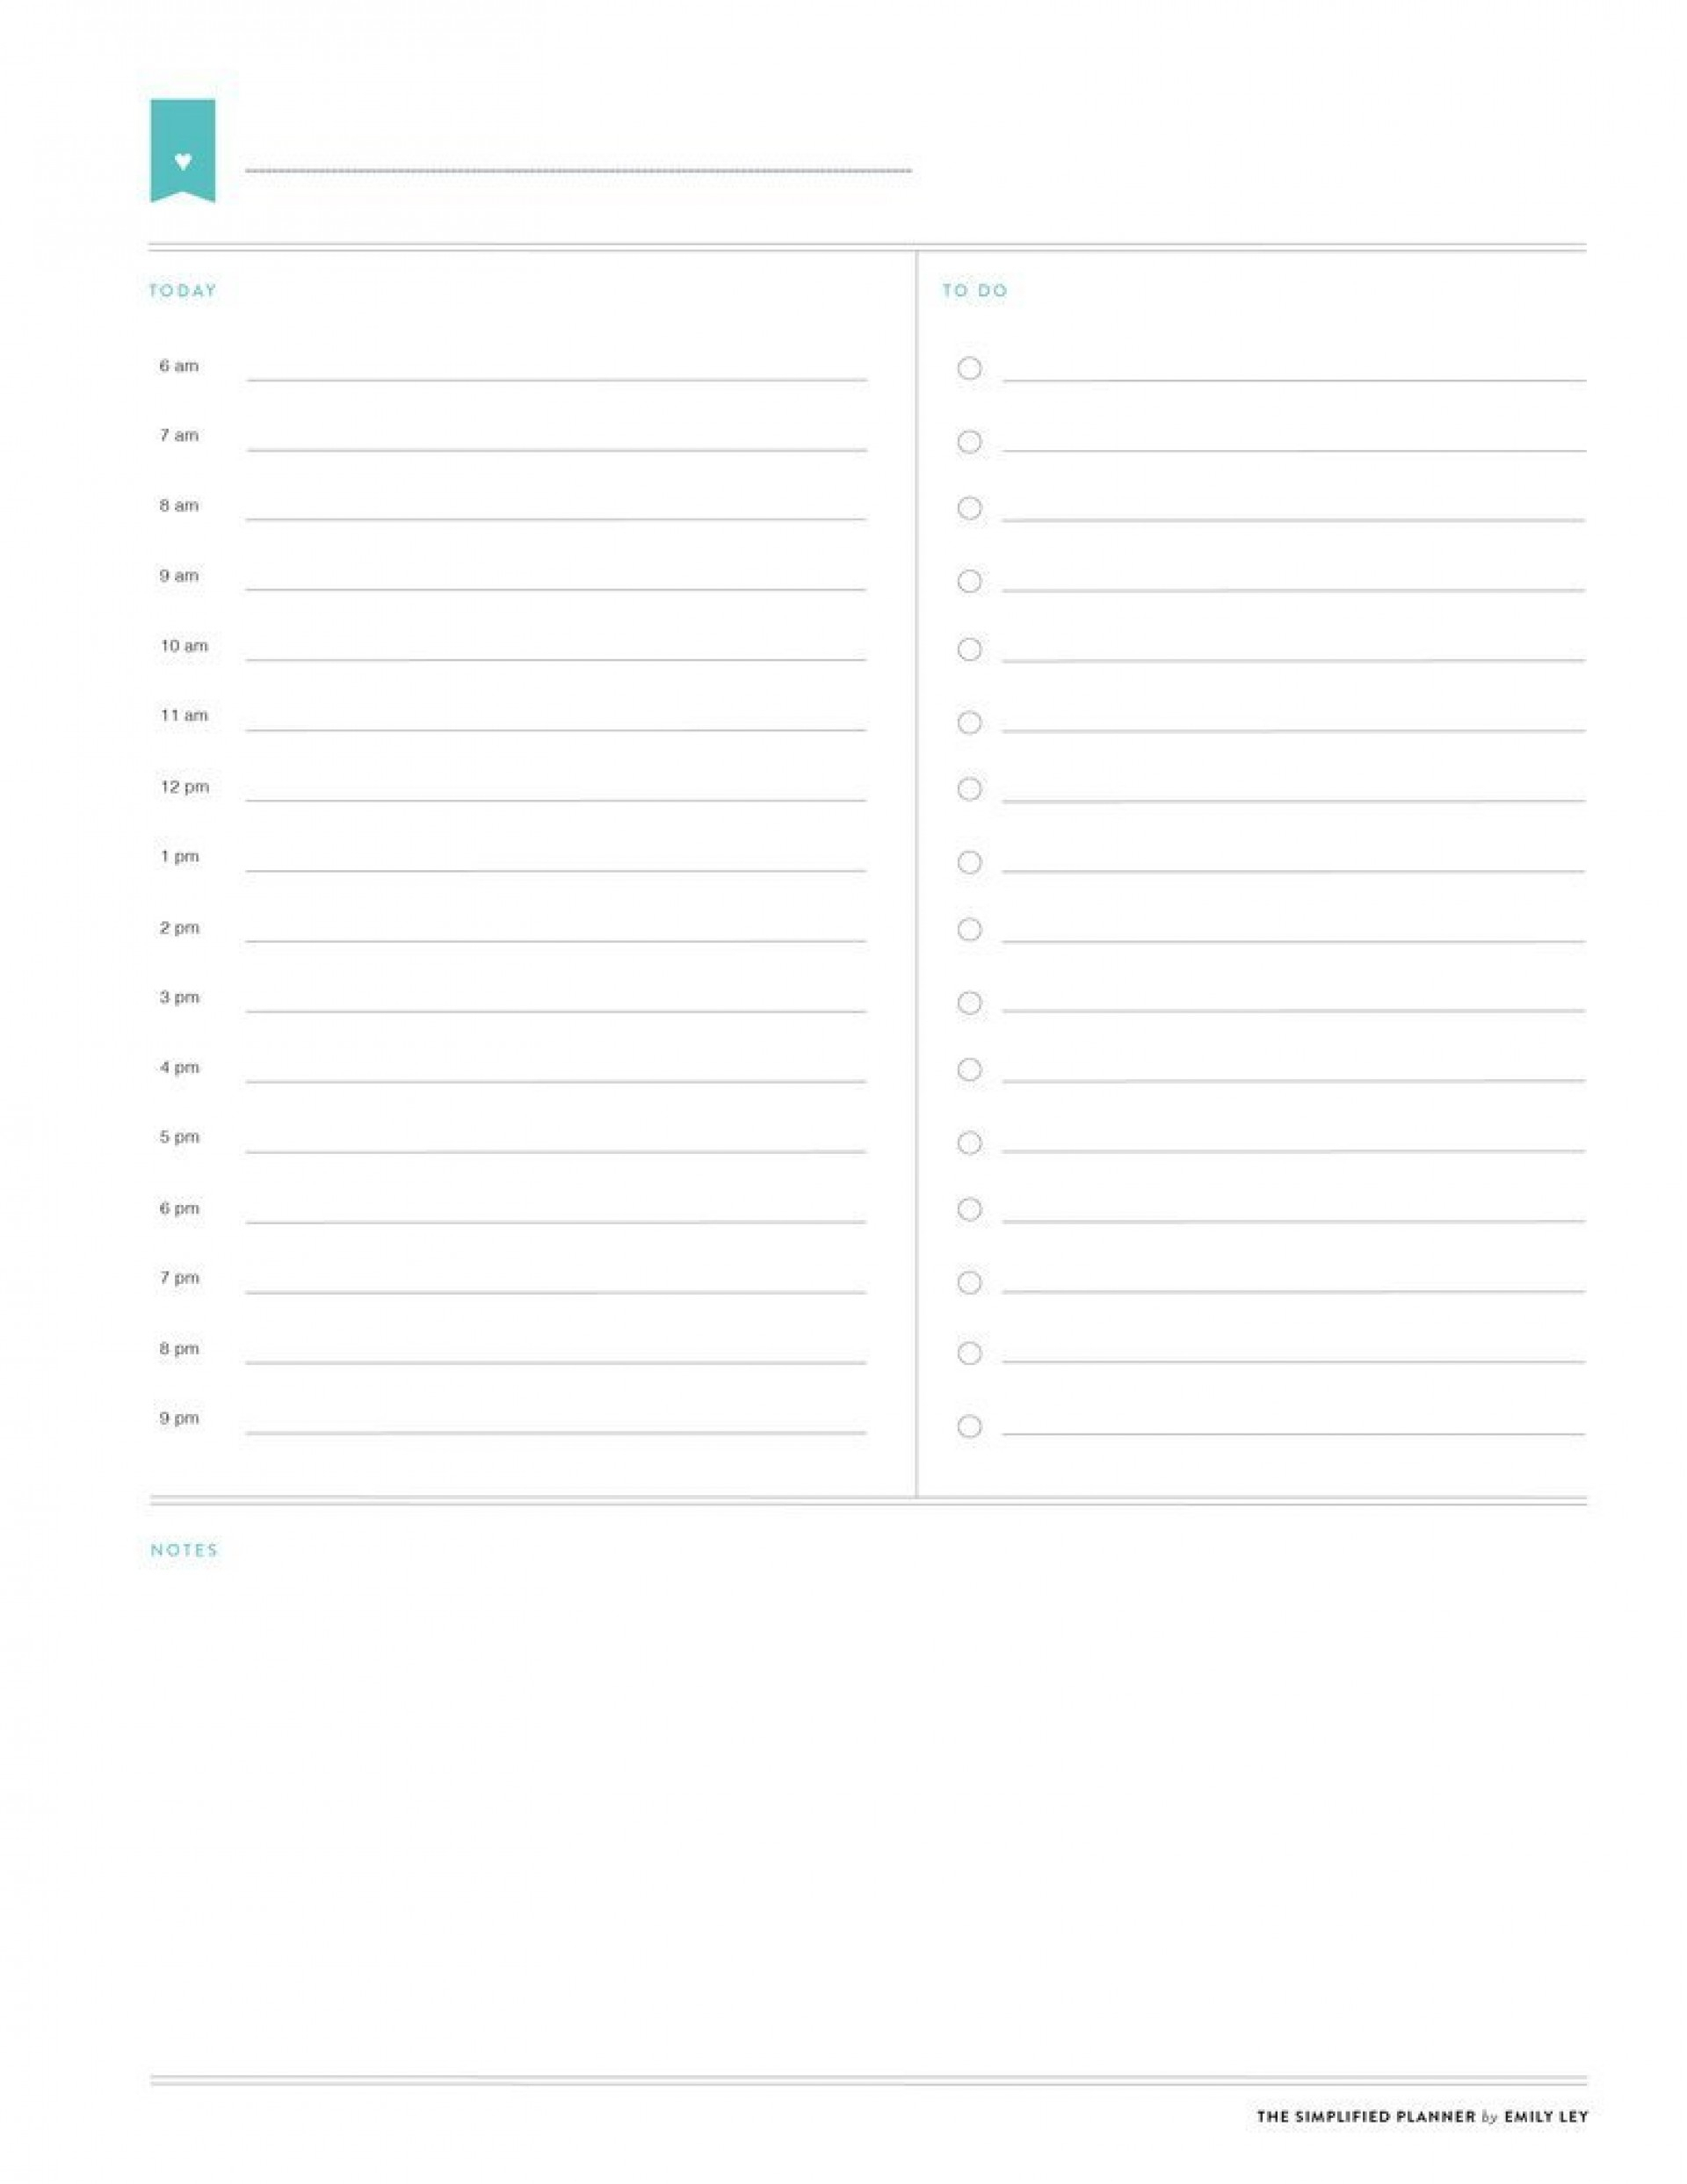 Daily Calendar Template 30 Minute Increments | Calendar throughout Free 30 Minute Appointment Schedule Template